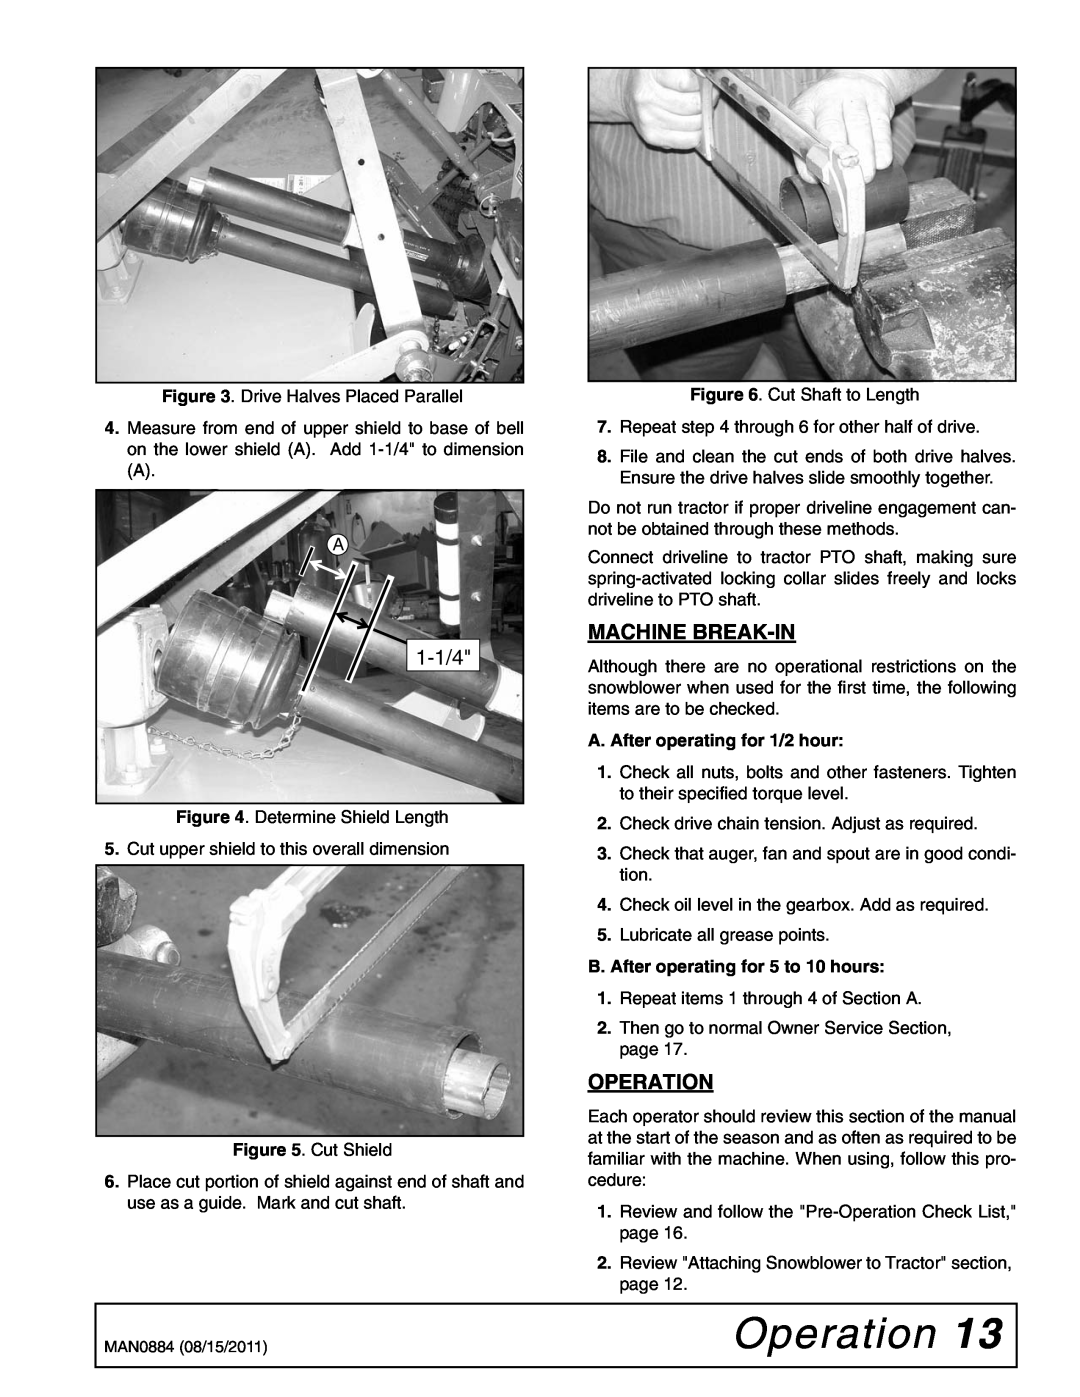 Woods Equipment SS96-2, SS84-2, SS108-2 manual 1-1/4, Machine Break-In, Operation, A. After operating for 1/2 hour 